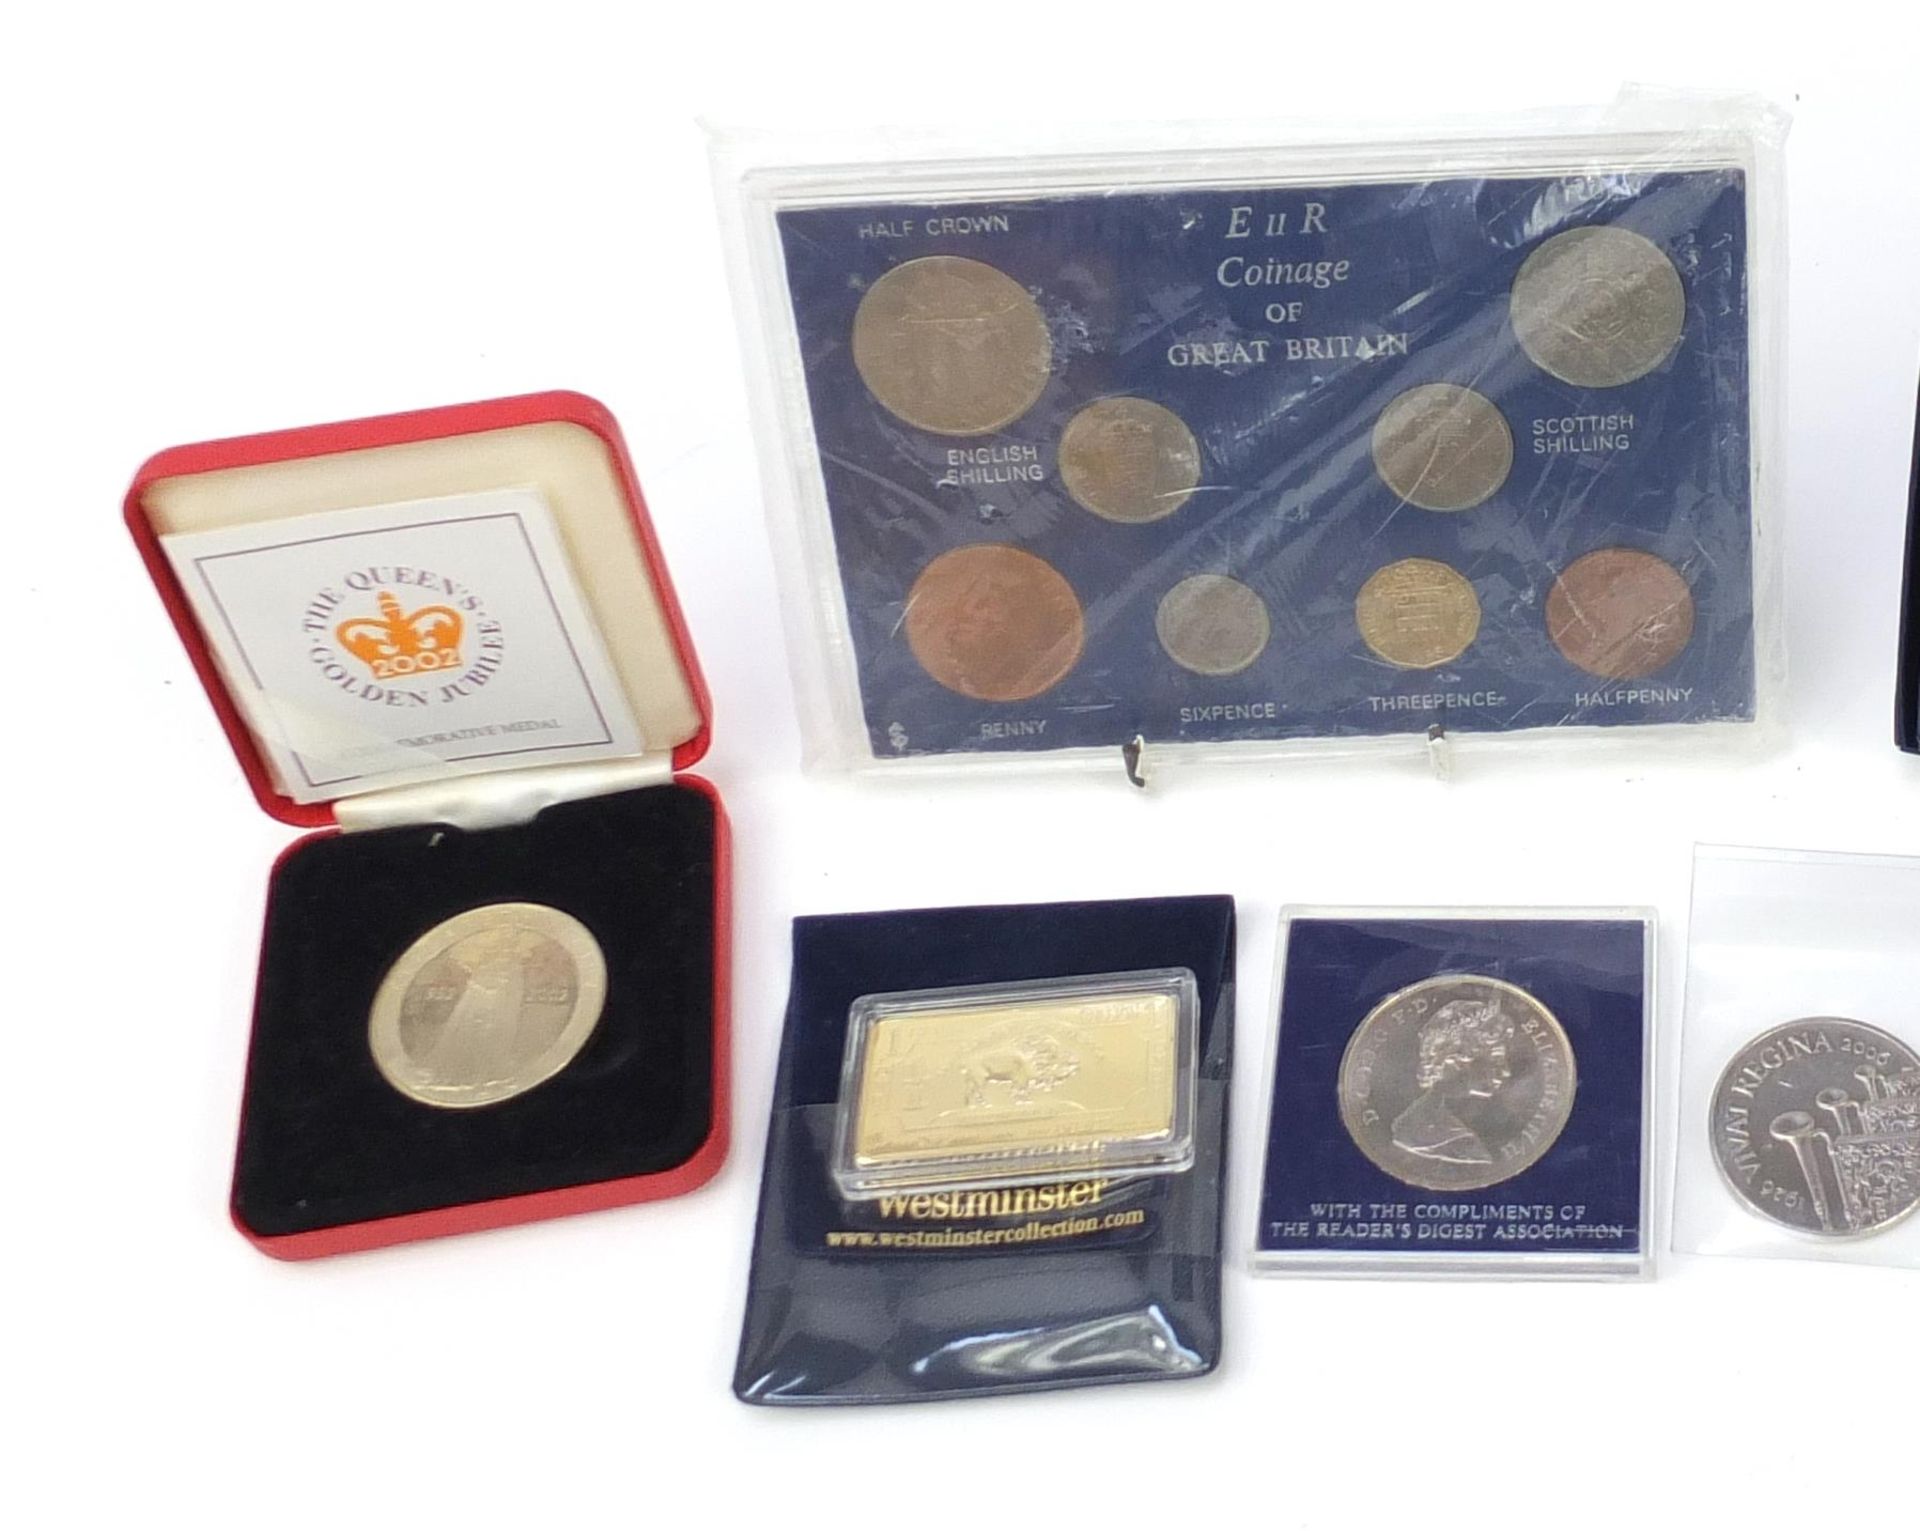 British commemorative coinage and tokens including five pound coins and Queen's Golden Jubilee - Image 2 of 7